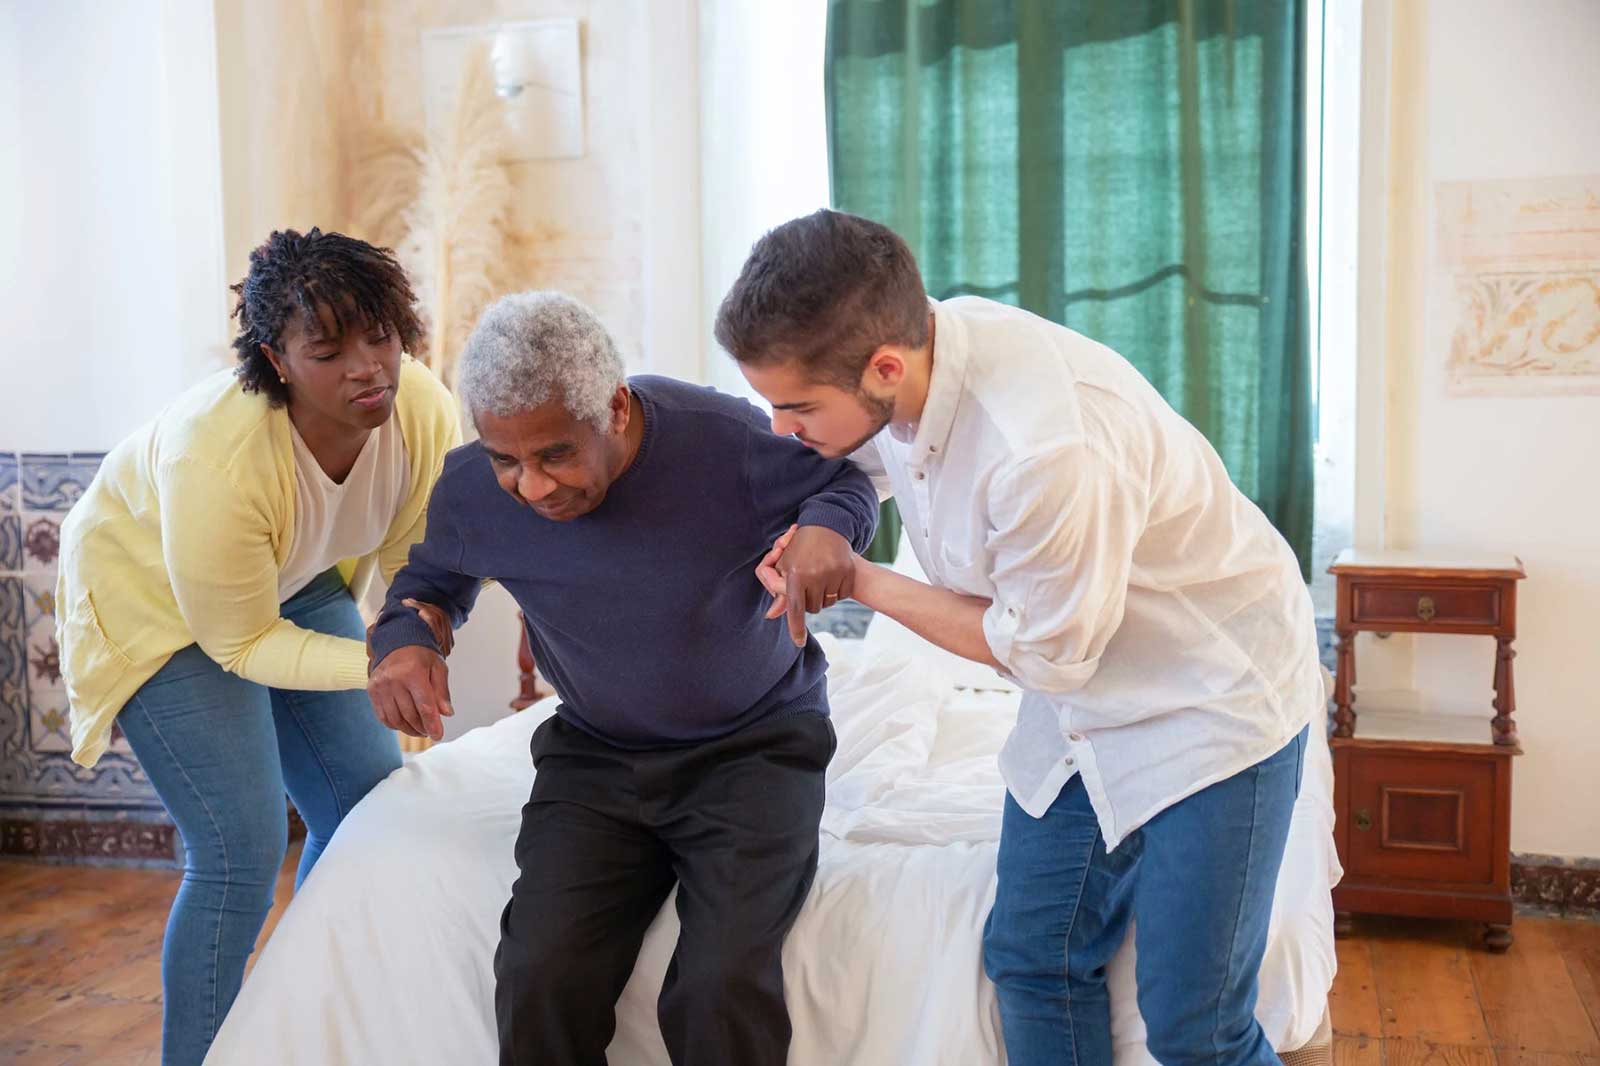 Female and male nursing home attendants helping an elderly man stand up